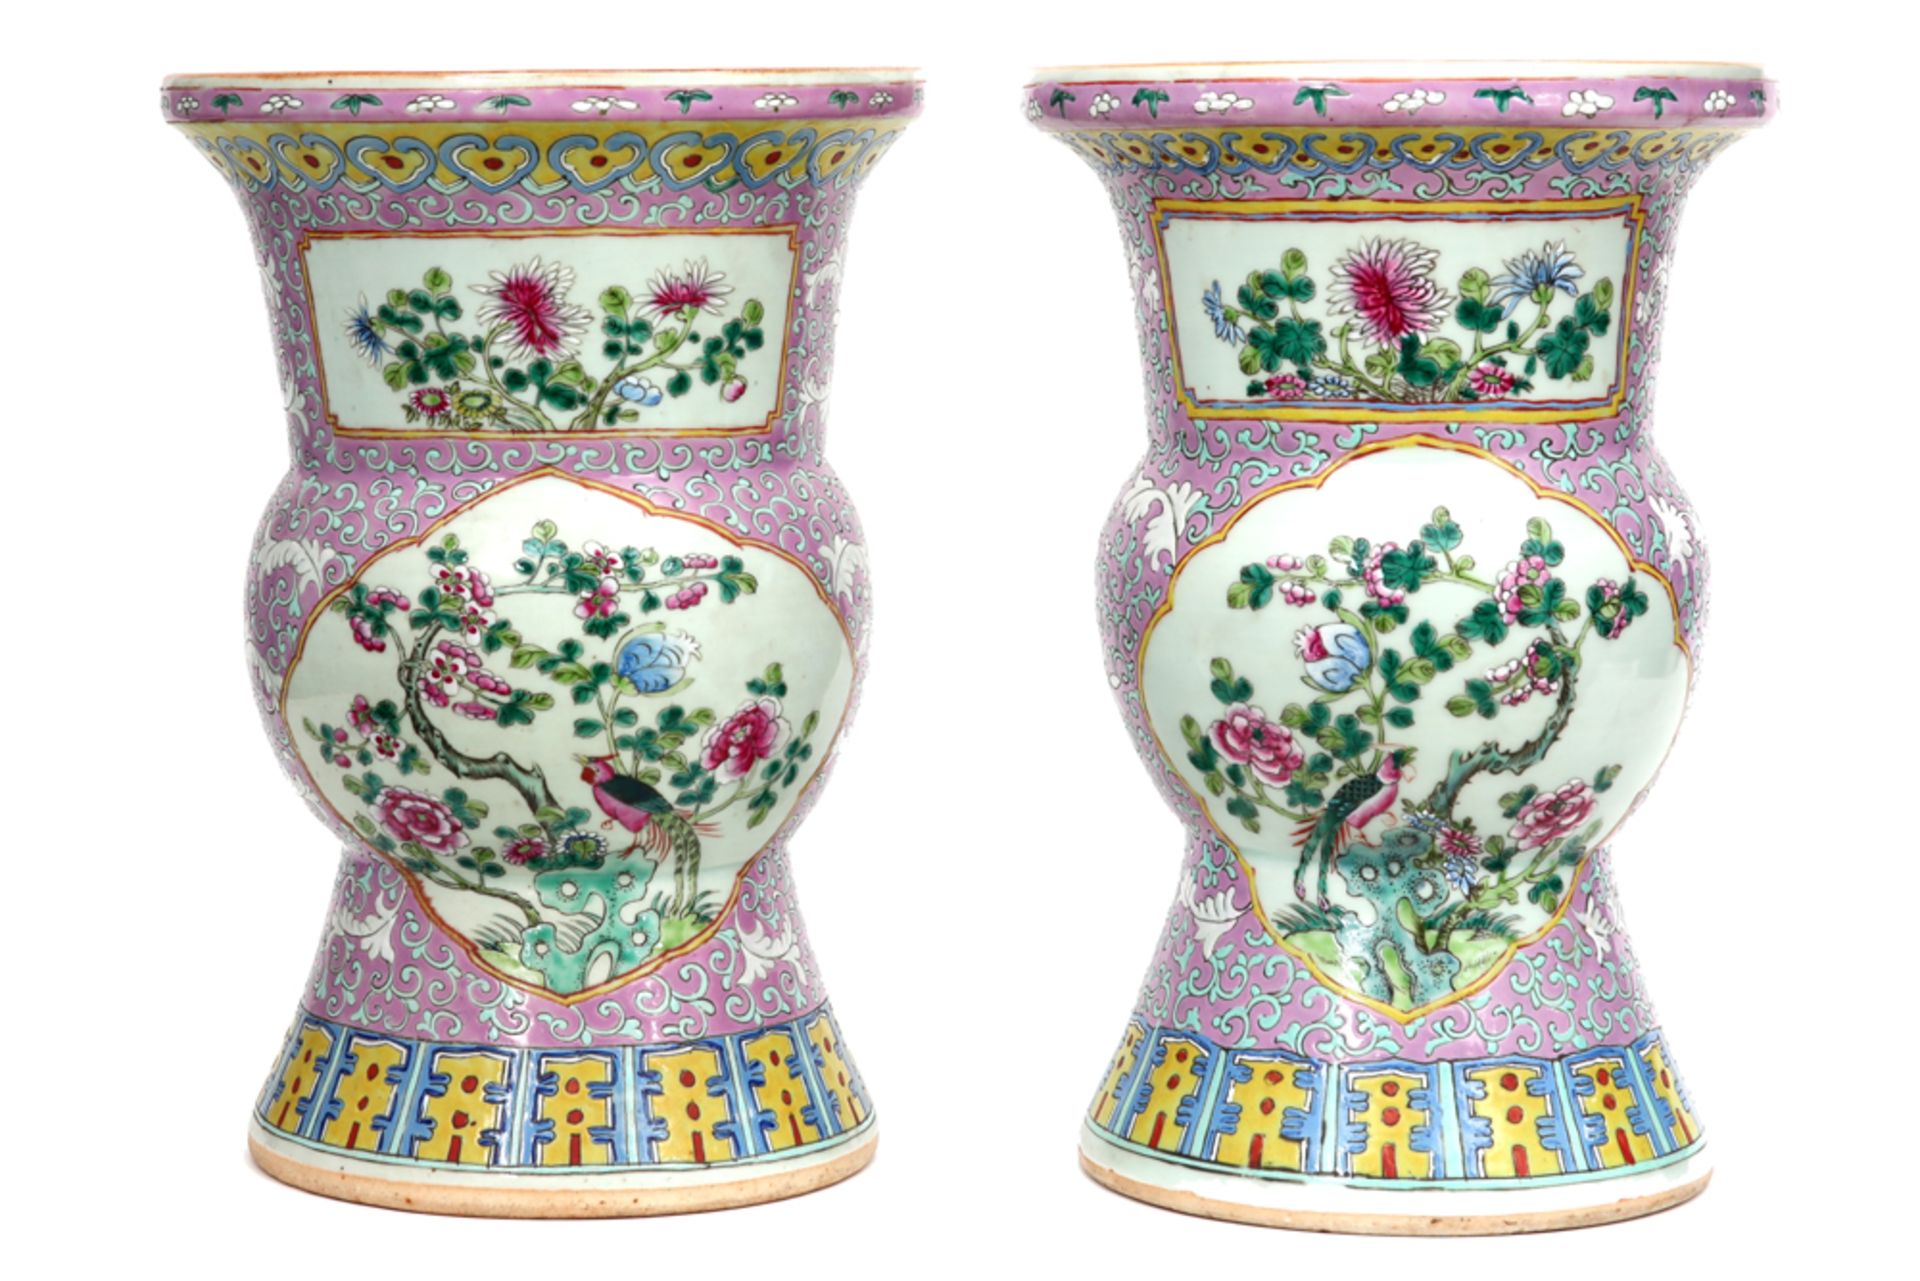 pair of 18th Cent. Chinese spittoon vases in porcelain with a 'Famille Rose' decor with pheasants in